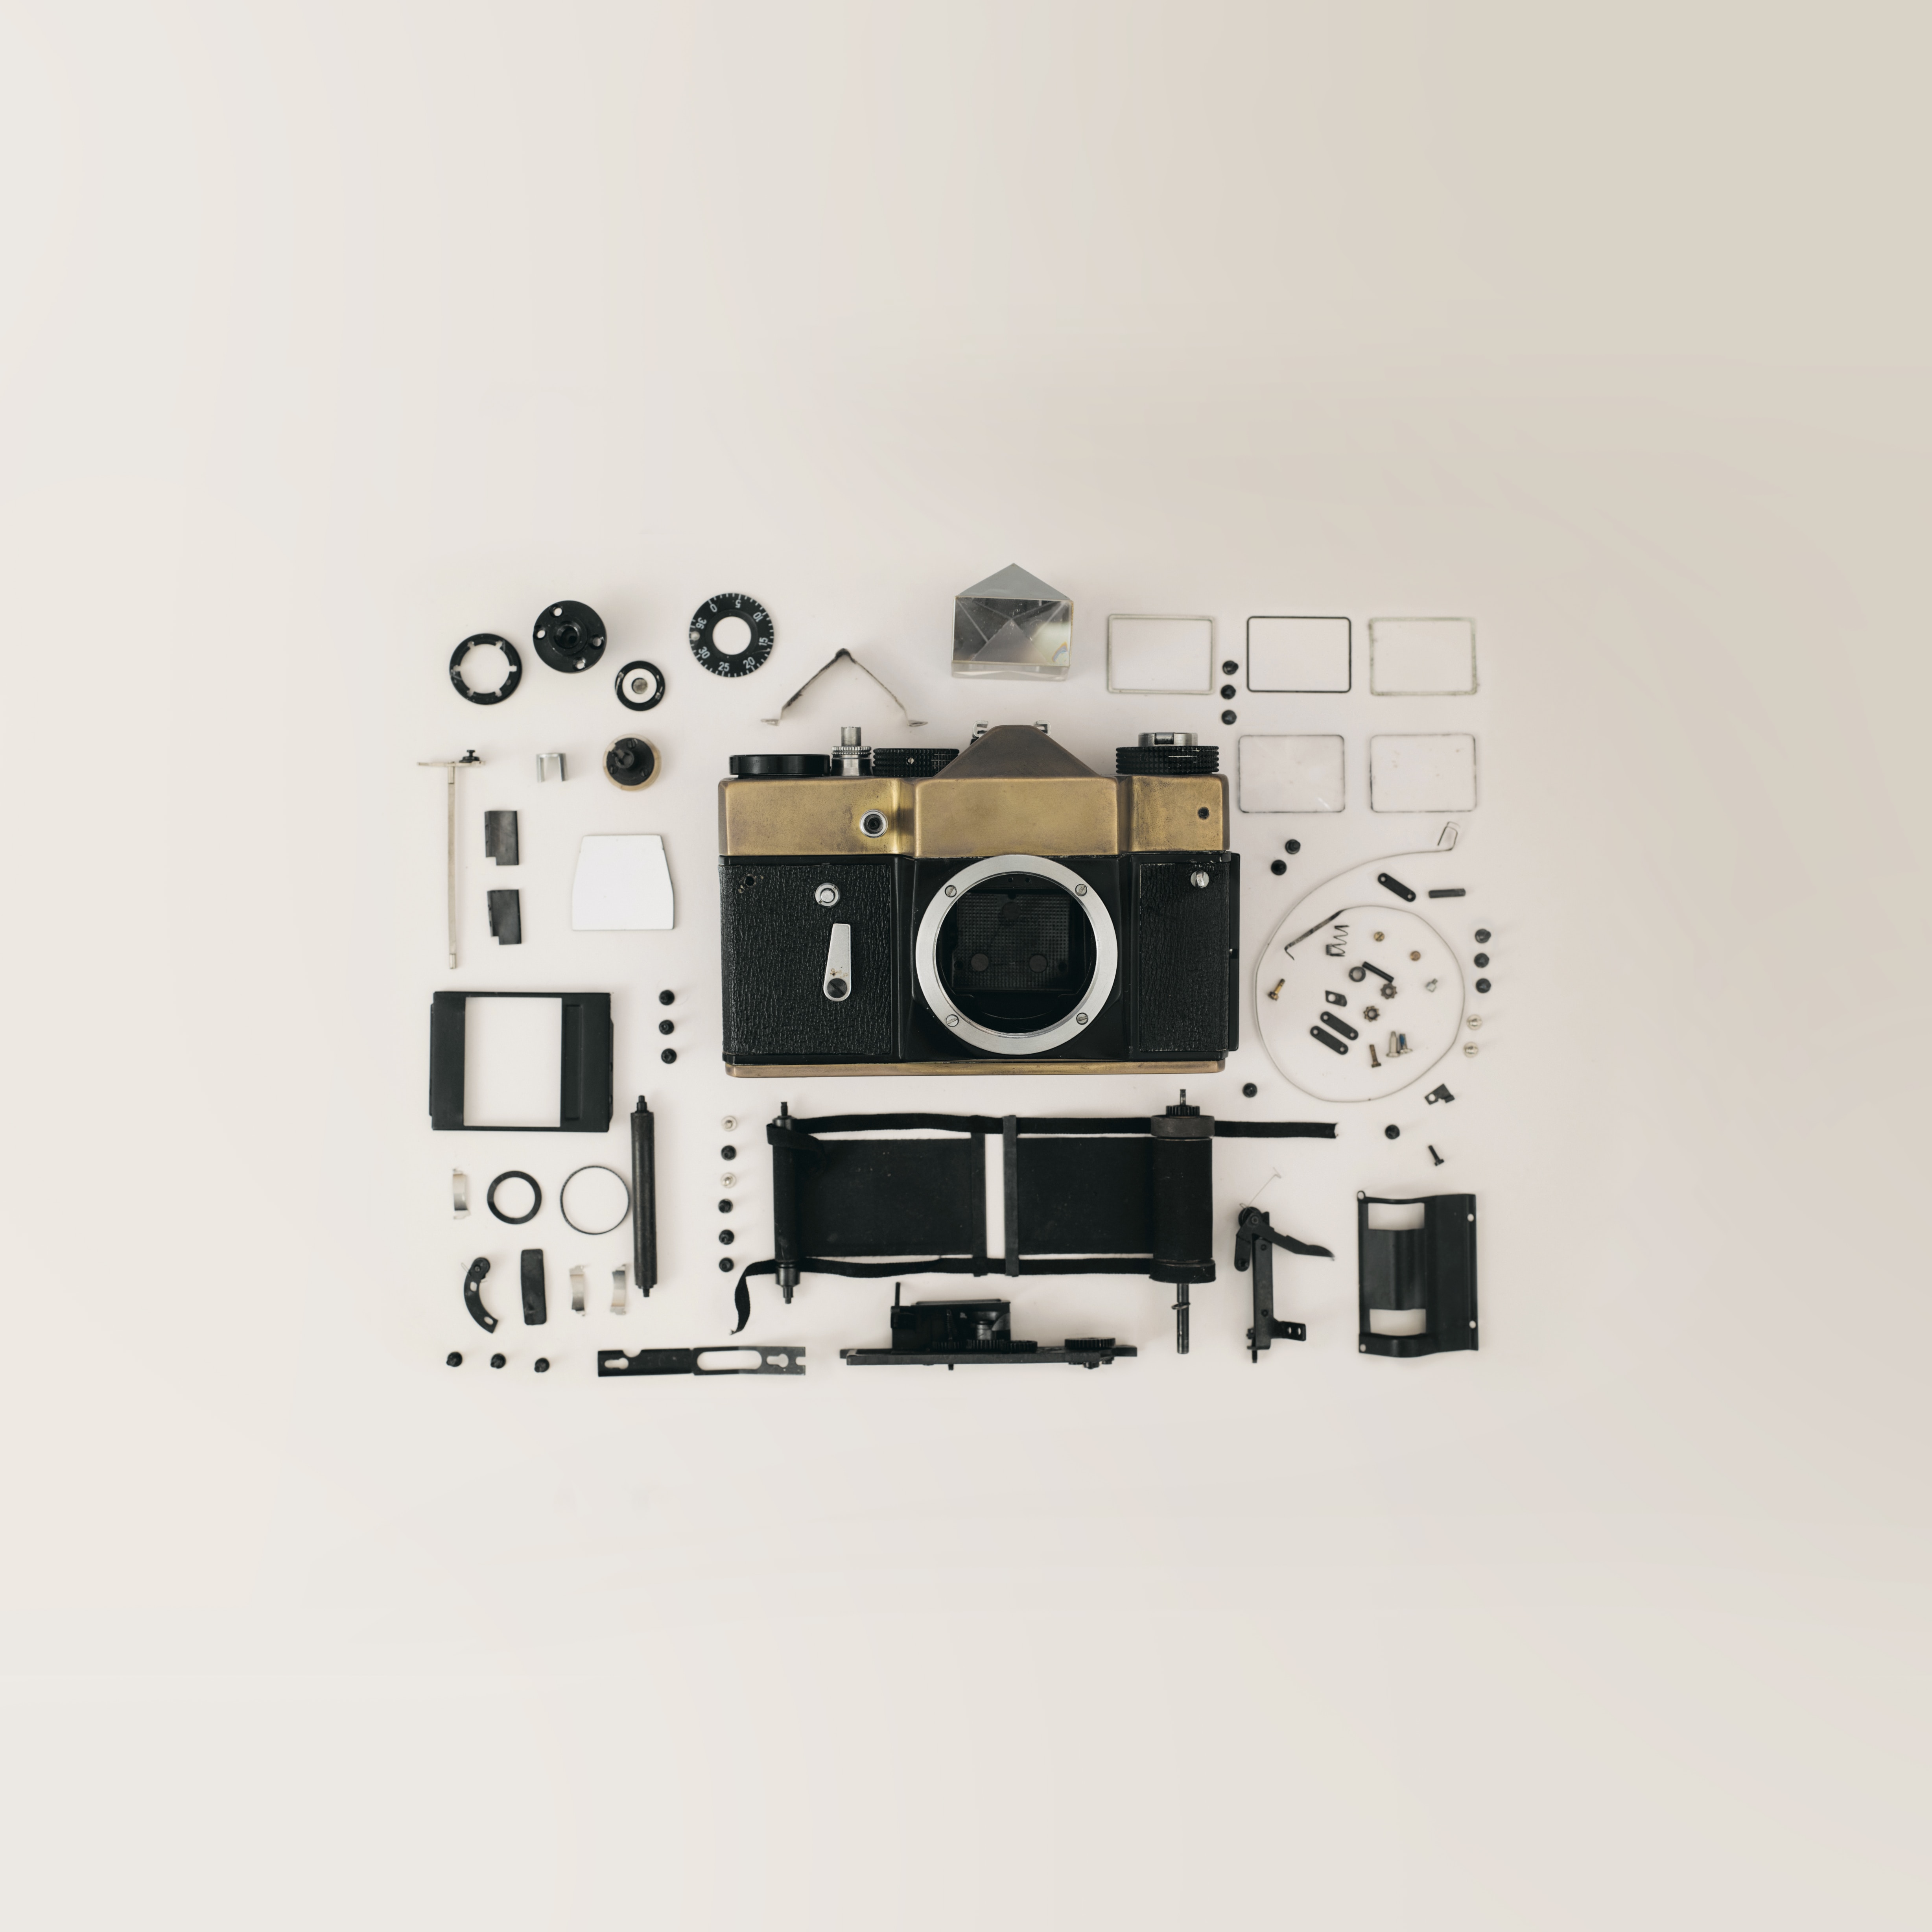 Camera Flat Lay Top View Parts Pieces Minimalism Simple Background White Background 4912x4912